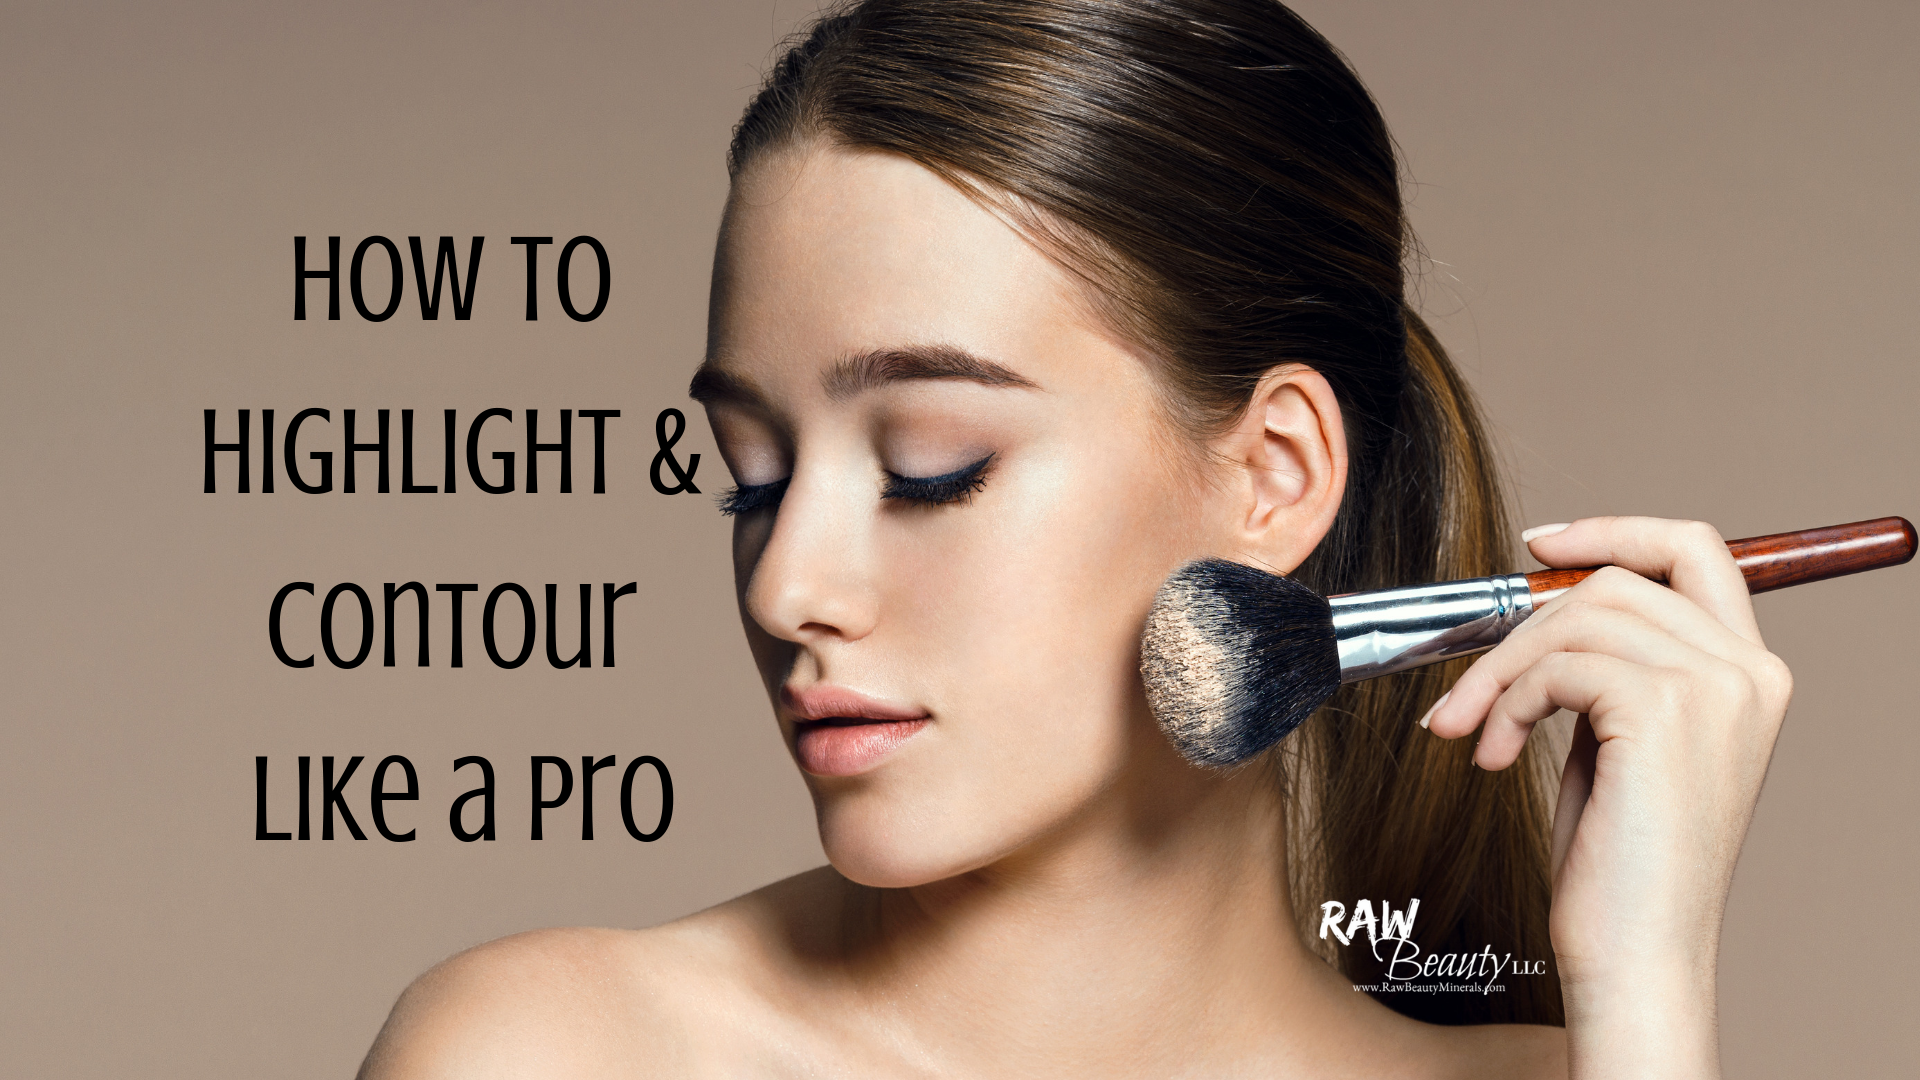 How to Highlight & Contour Like a Pro